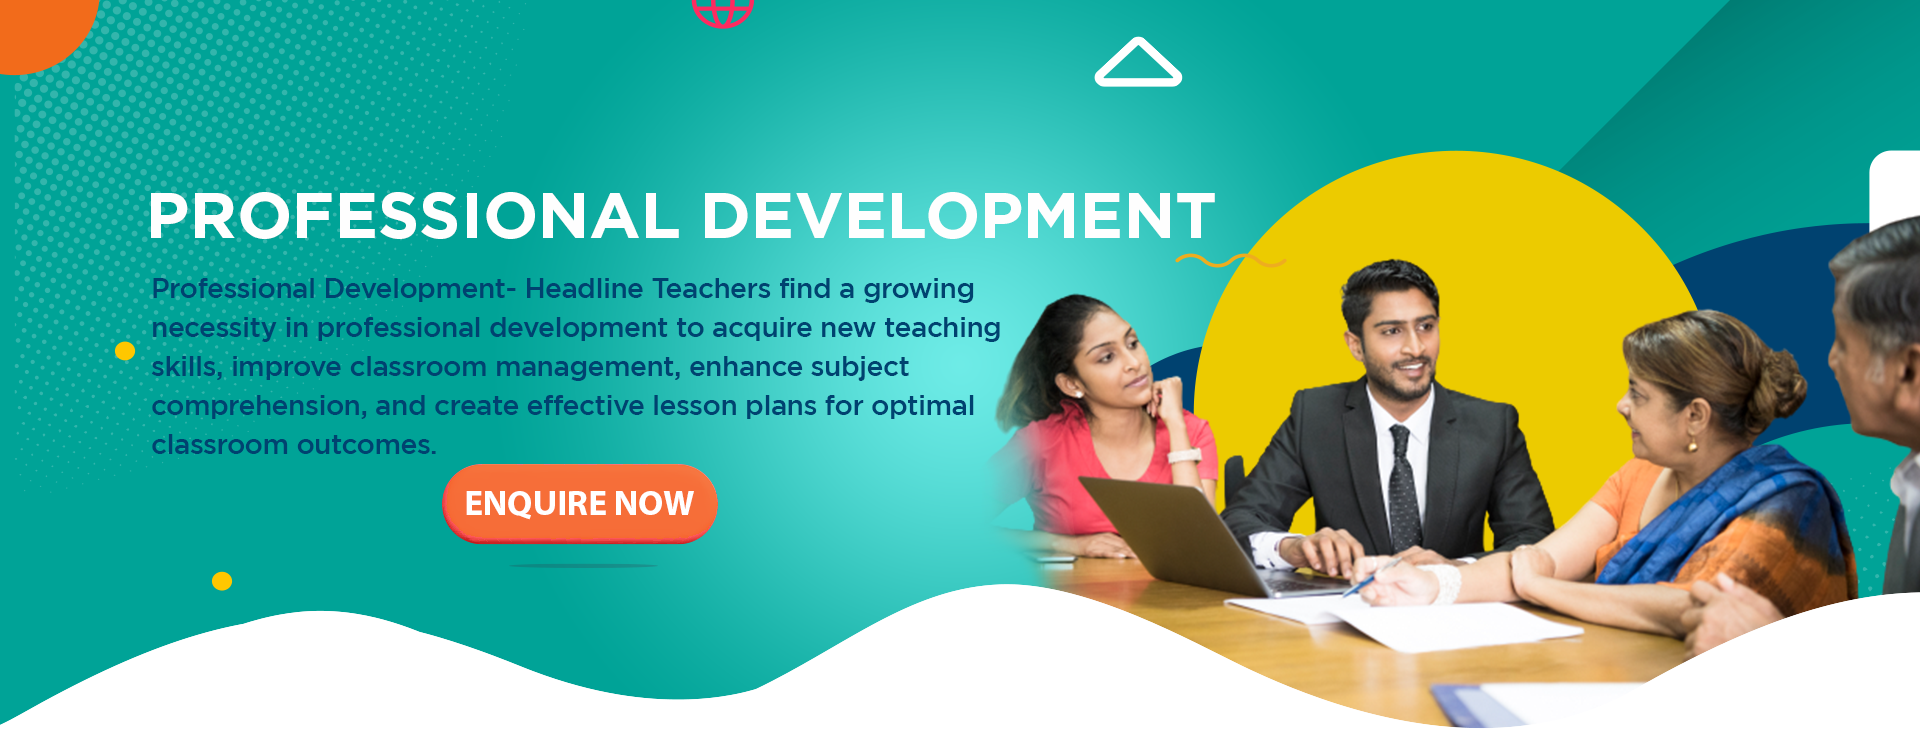 Professional development for teachers in National Education Policy 2020 ( NEP)